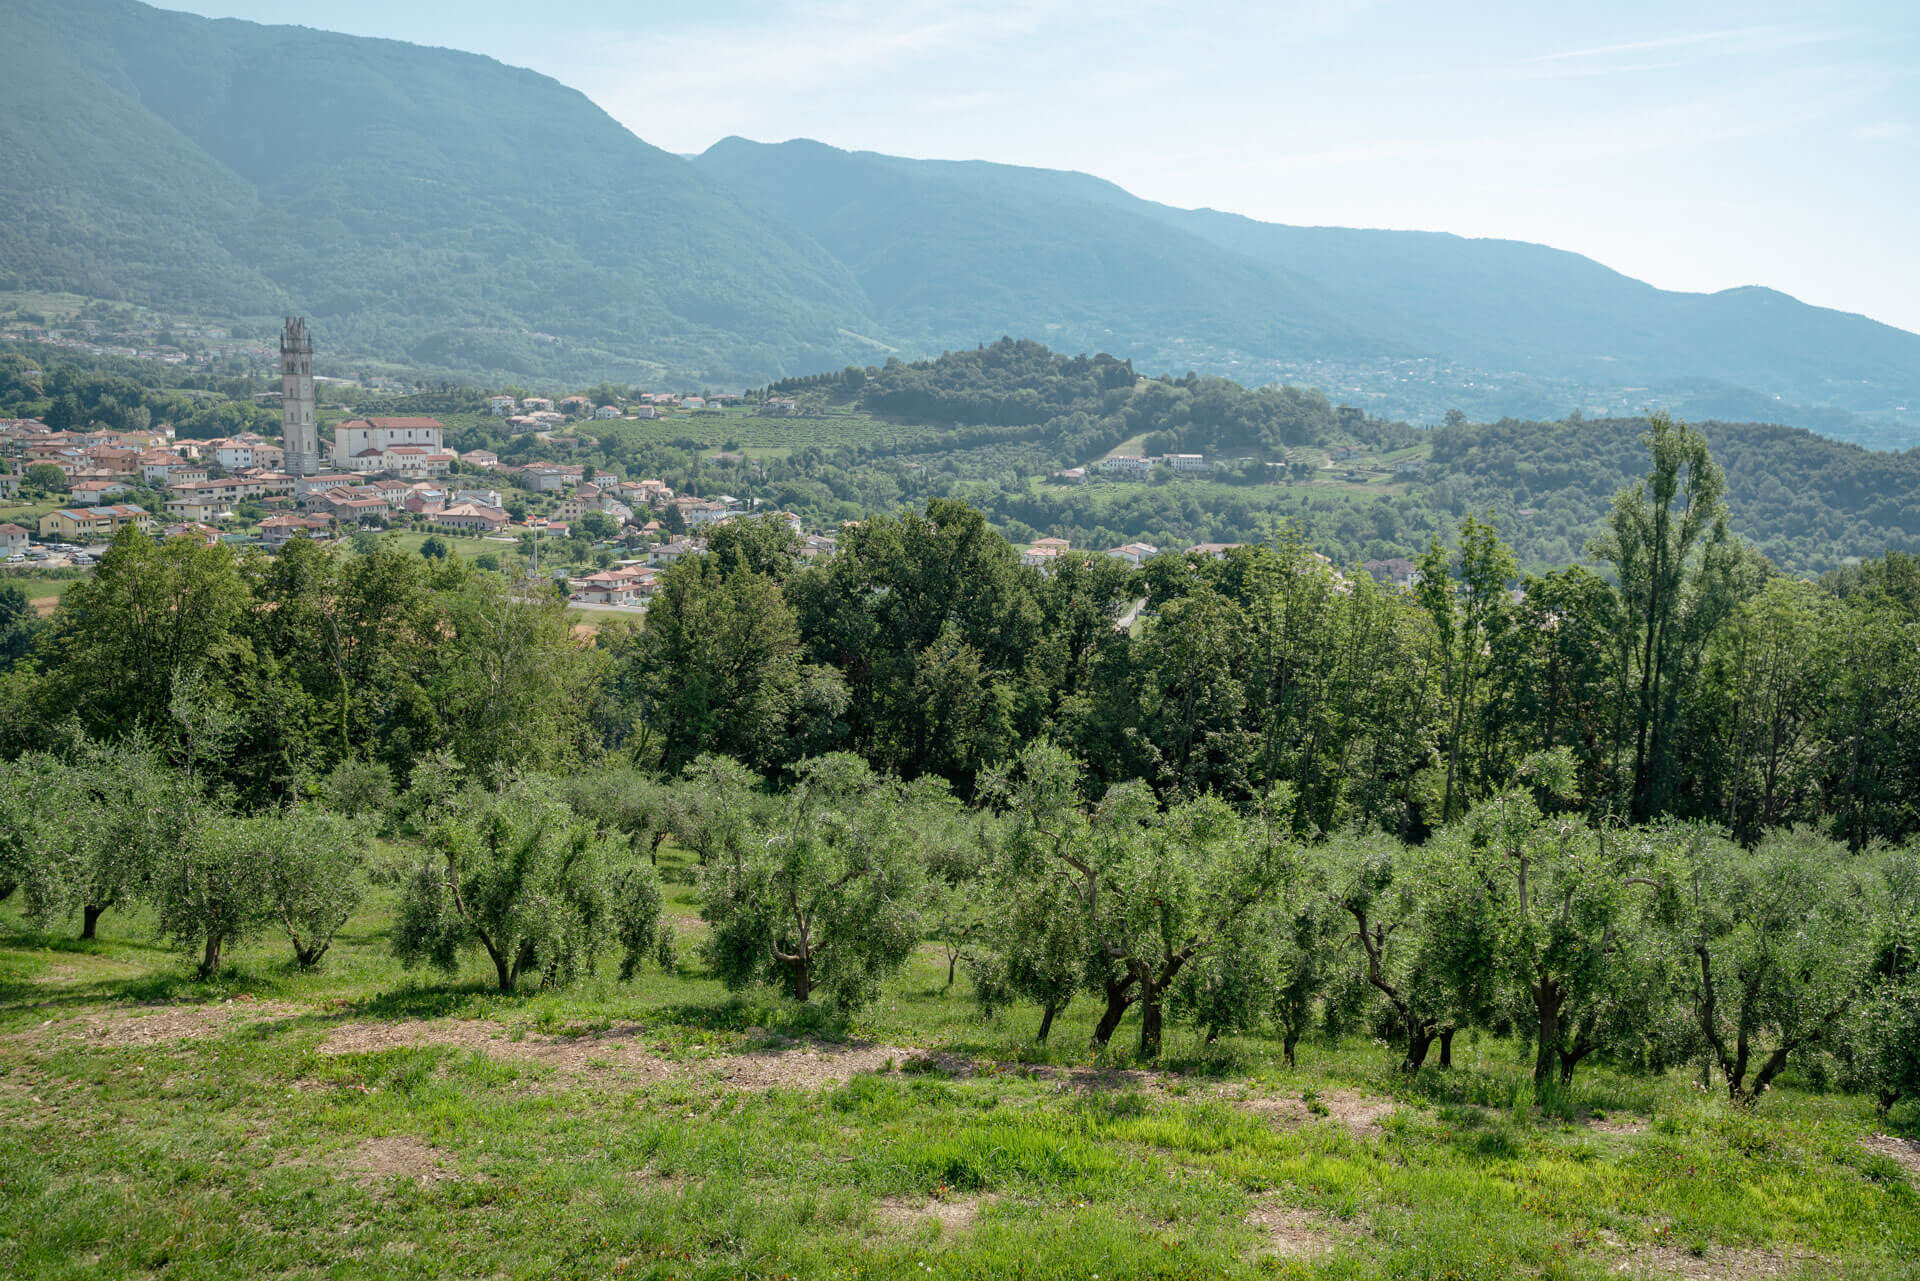 Olive groves in Veneto? A story that can be heard throughout the centuries.